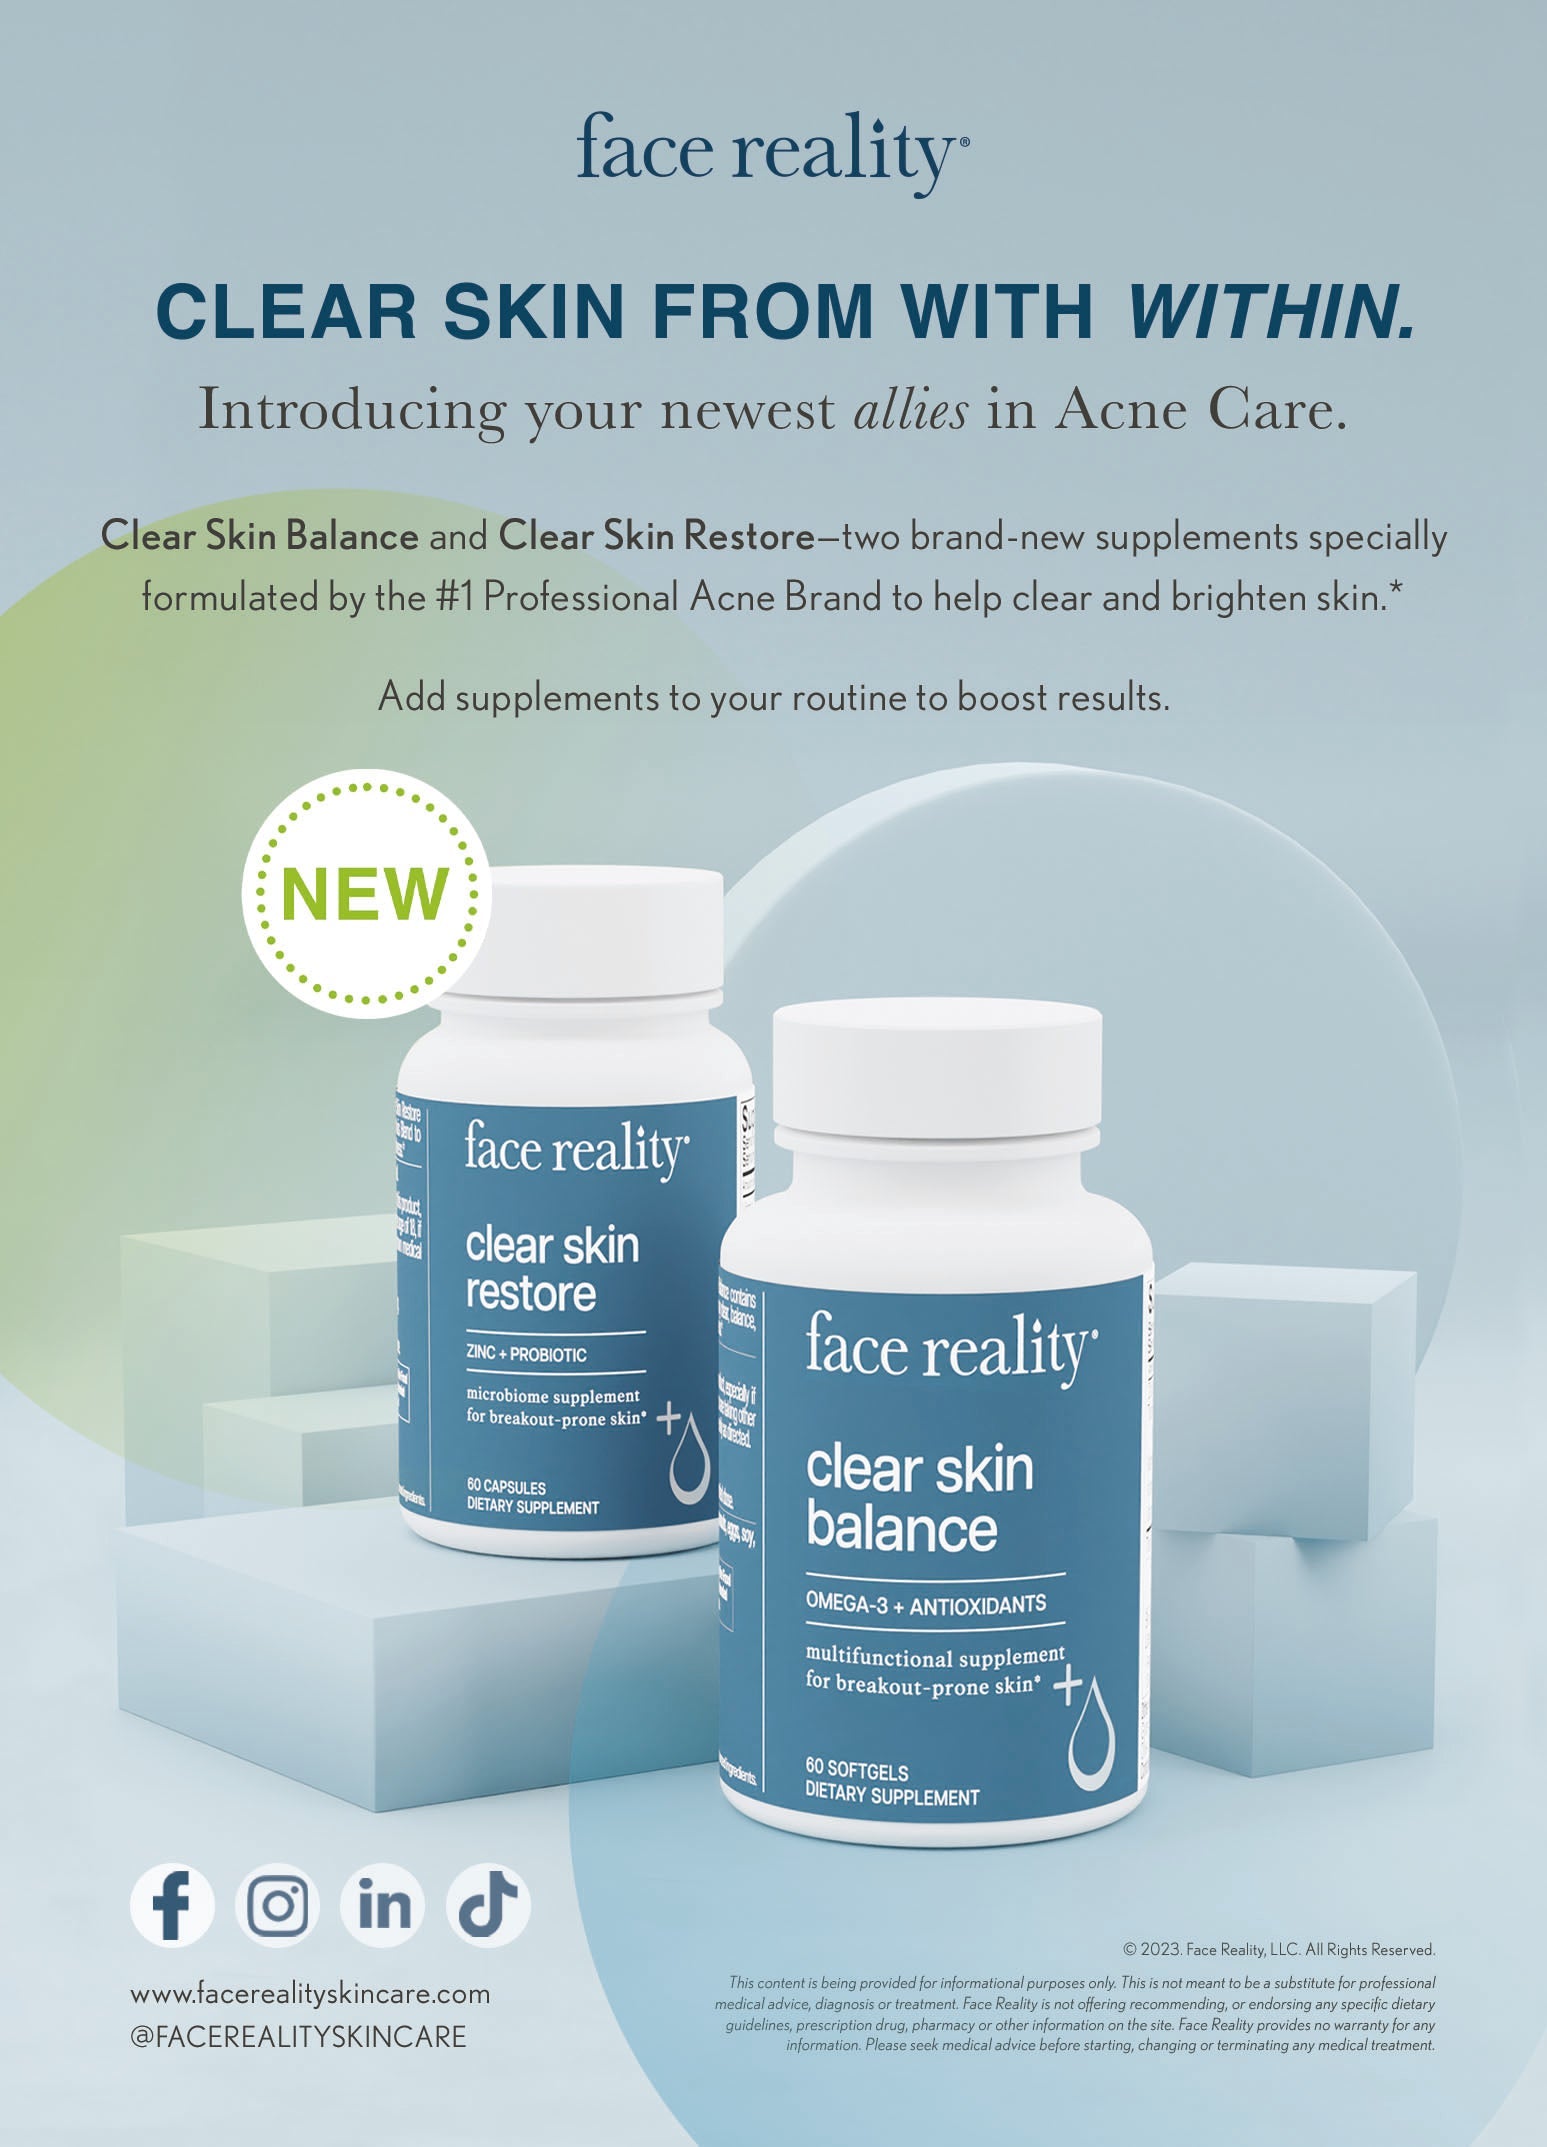 Face Reality Clear Skin Restore